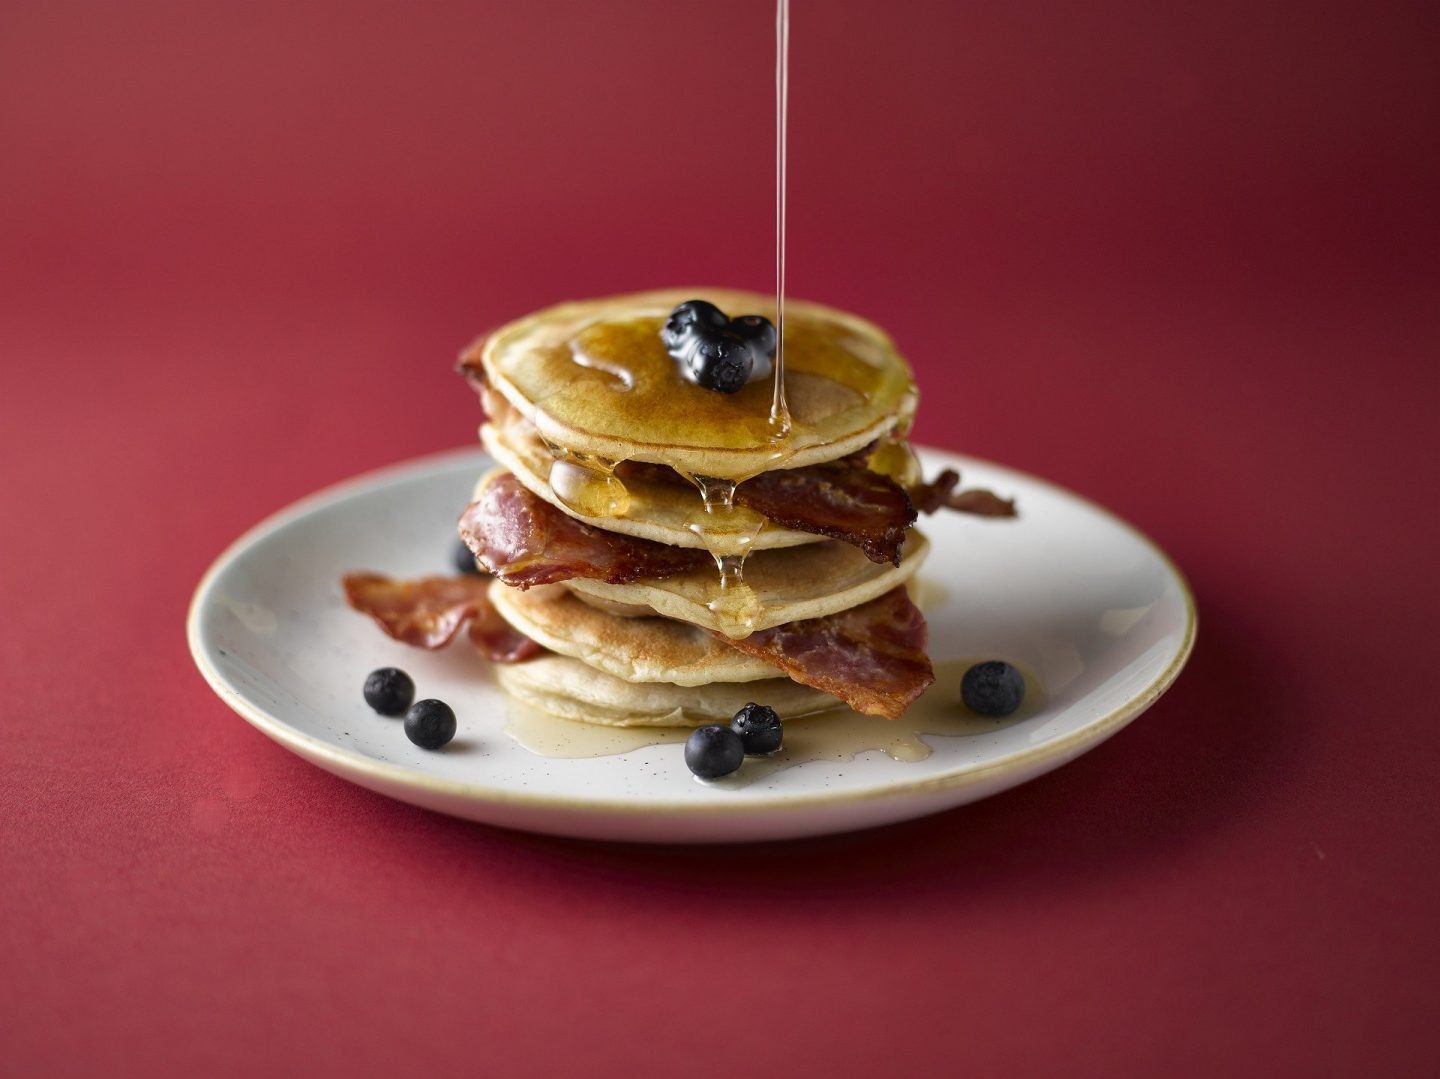 A pancake stack with bacon, maple syrup and blueberries